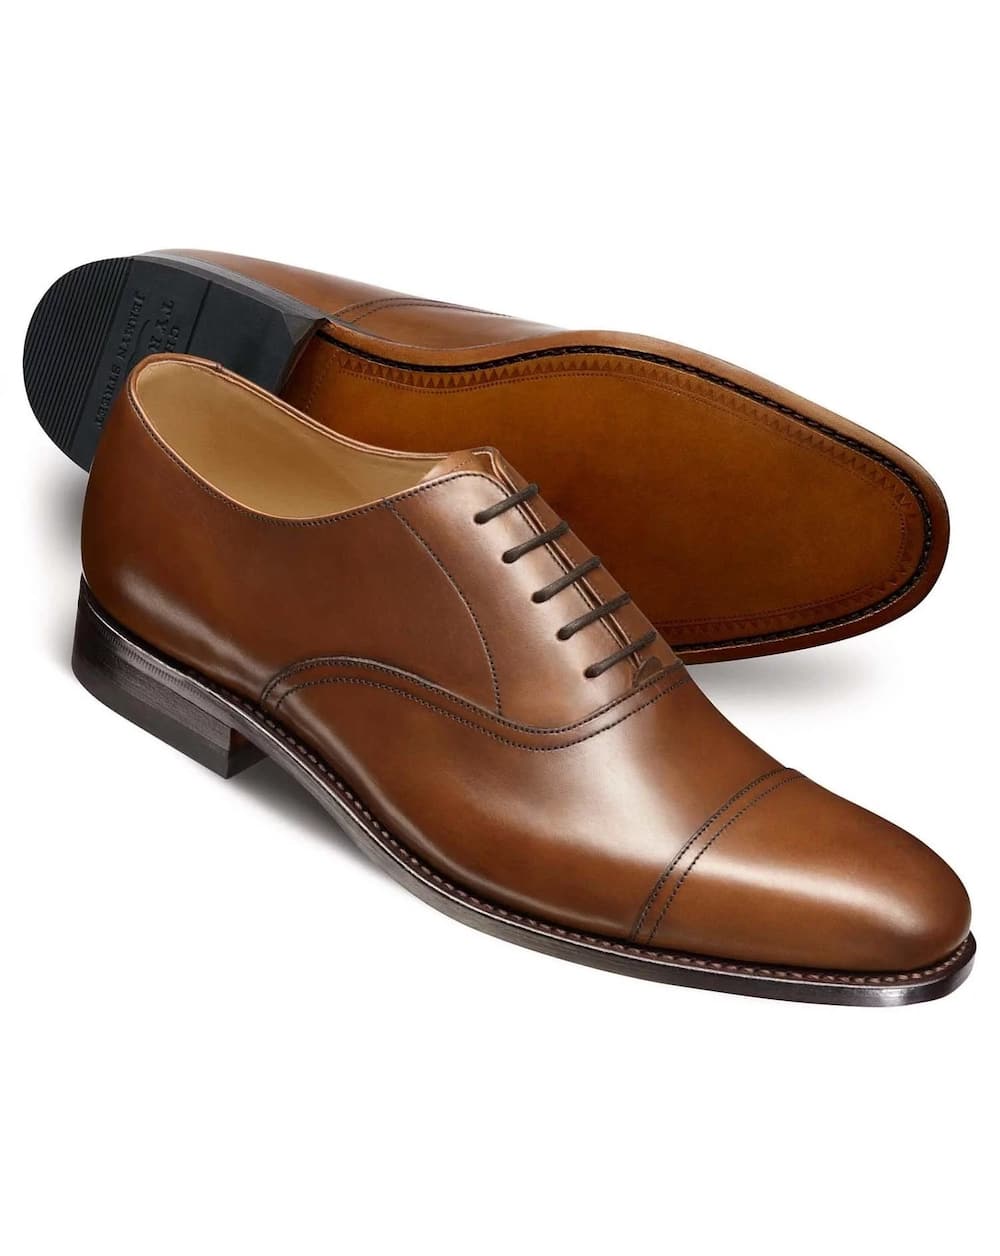 6 types of shoes every man must own in his lifetime